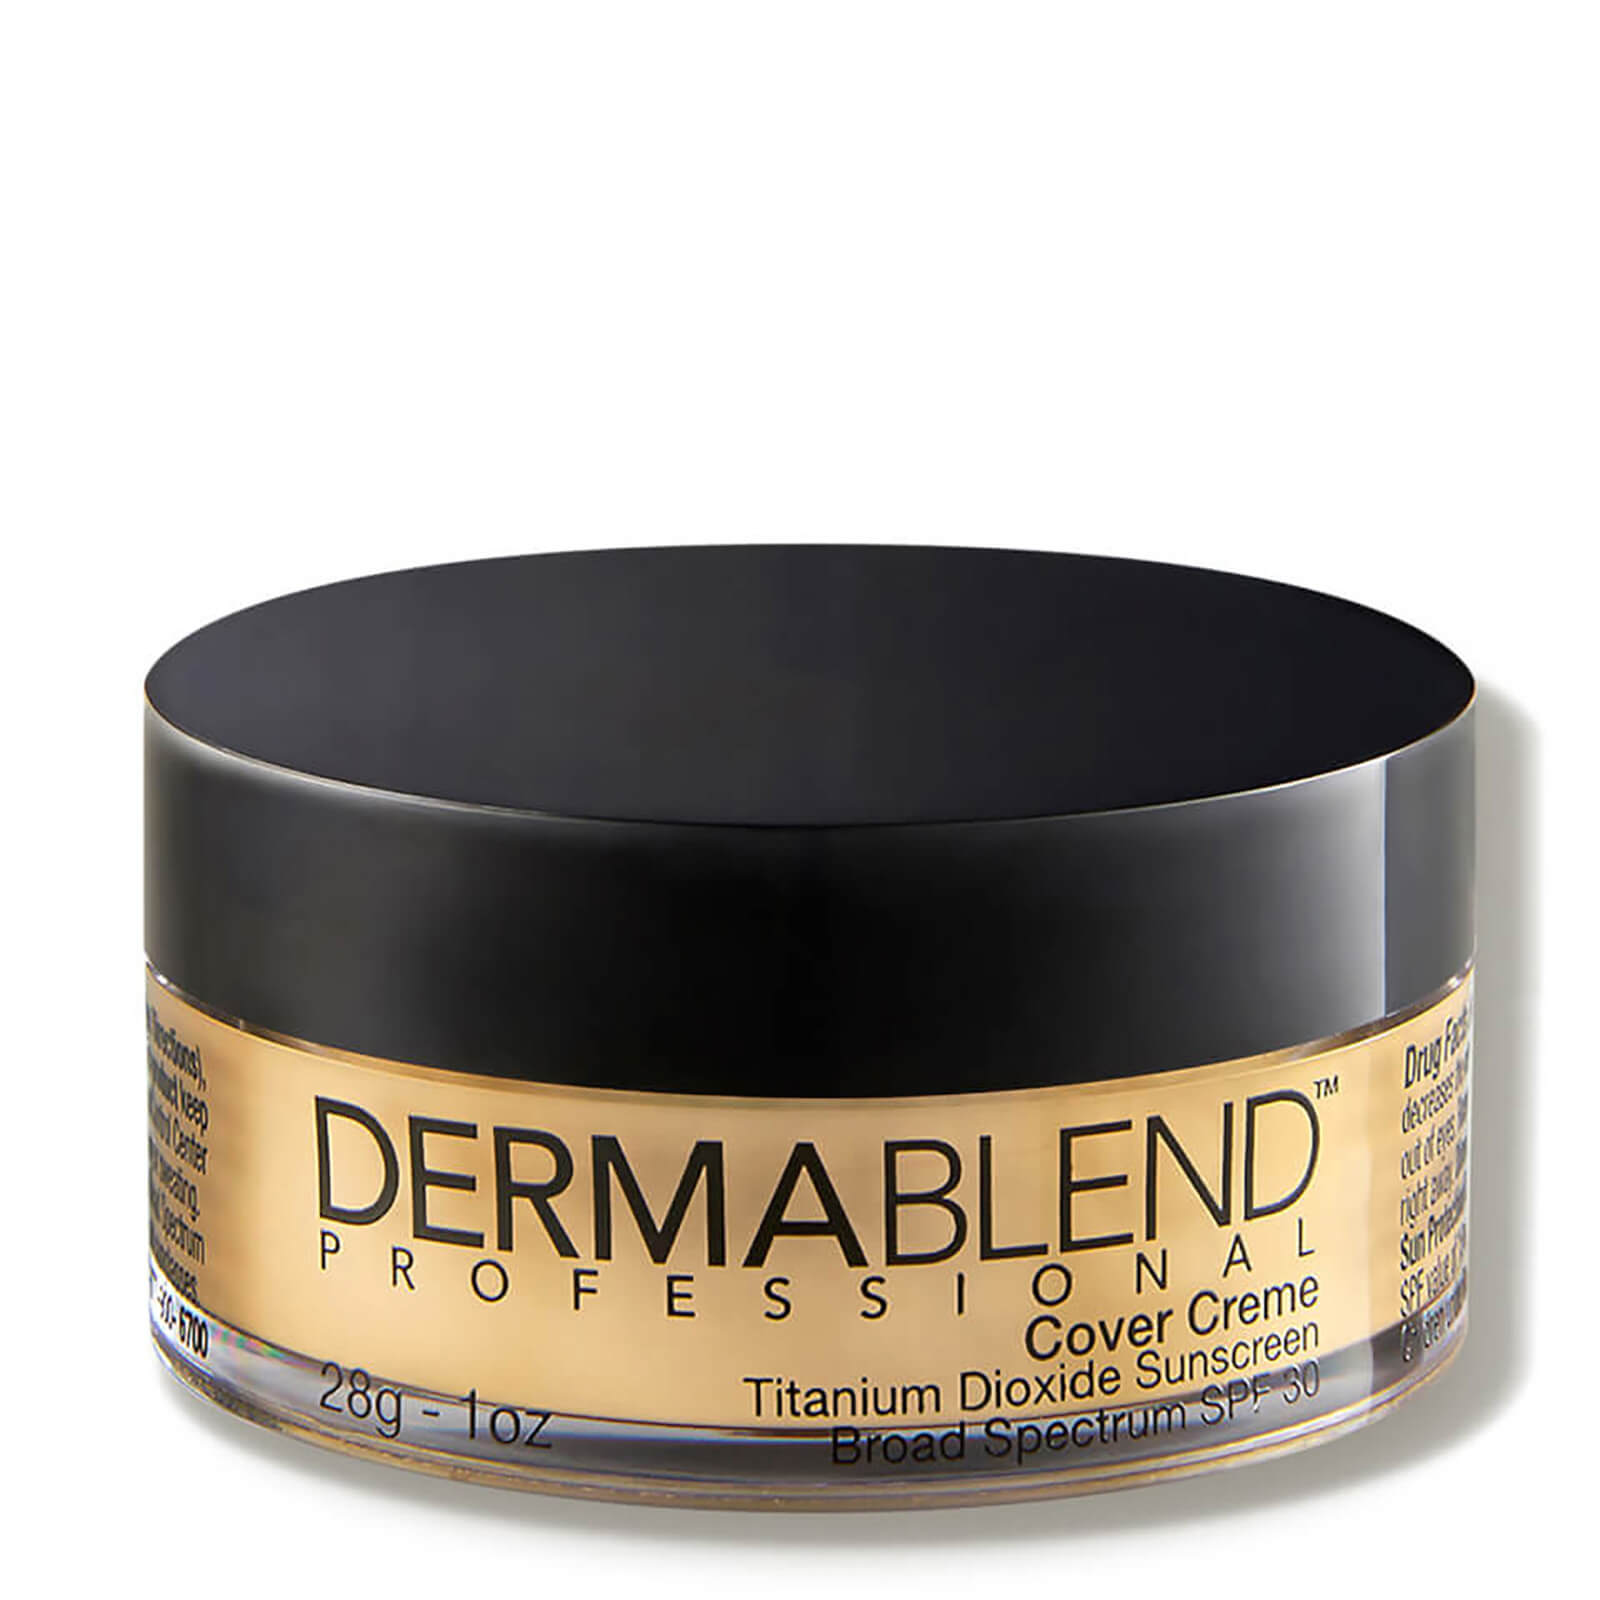 Dermablend Cover Creme Full Coverage Foundation With Spf 30 (1 Oz.) - 40 Warm In 40 Warm - Caramel Beige